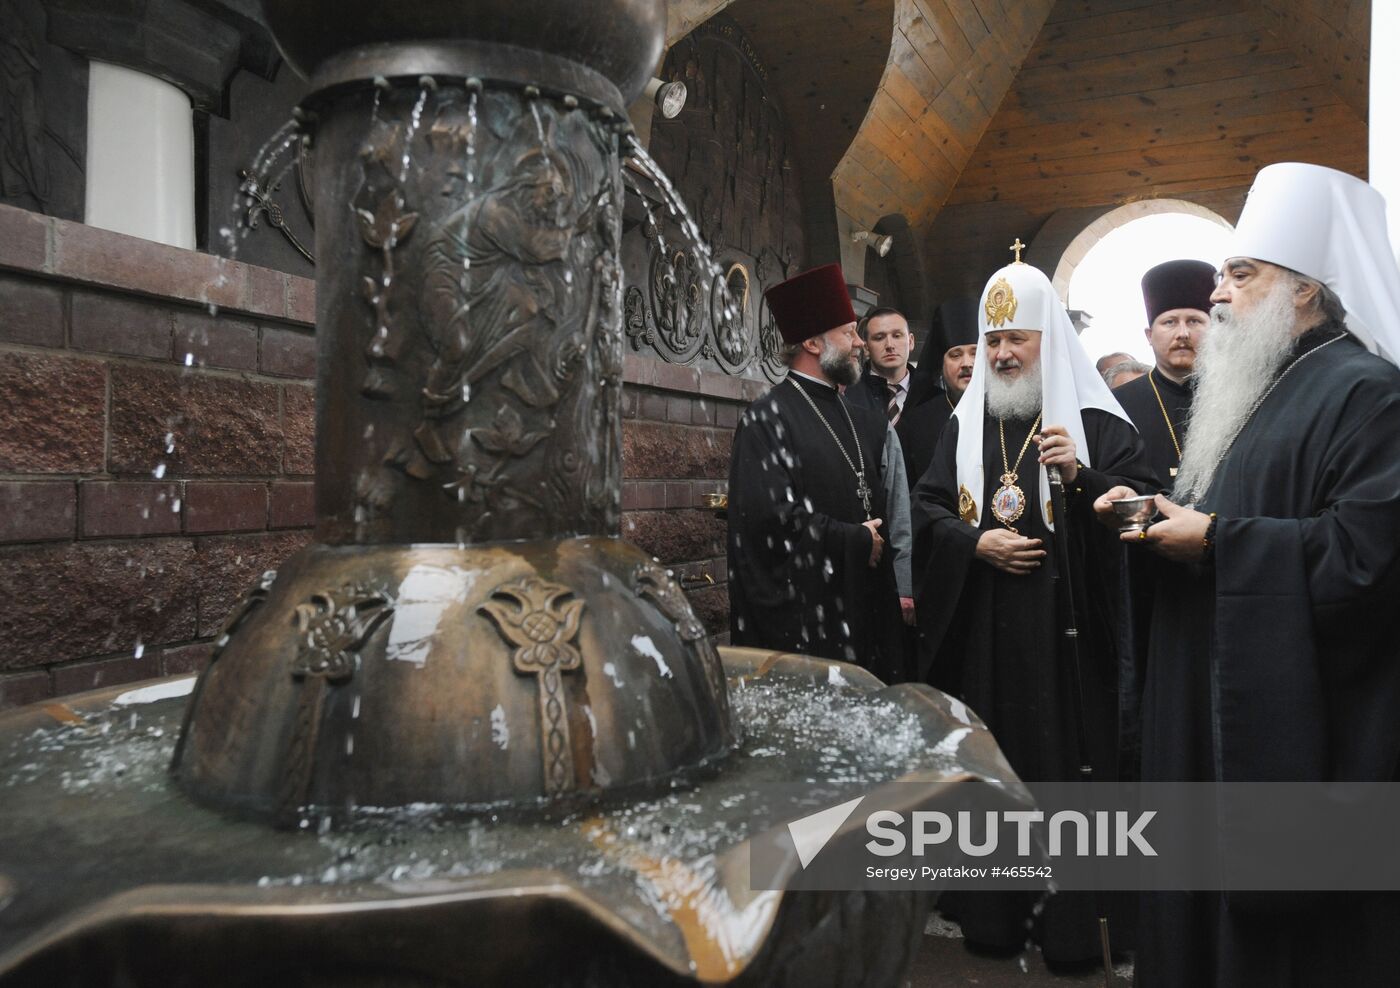 Patriarch Kirill of Moscow and All Russia visits Belarus